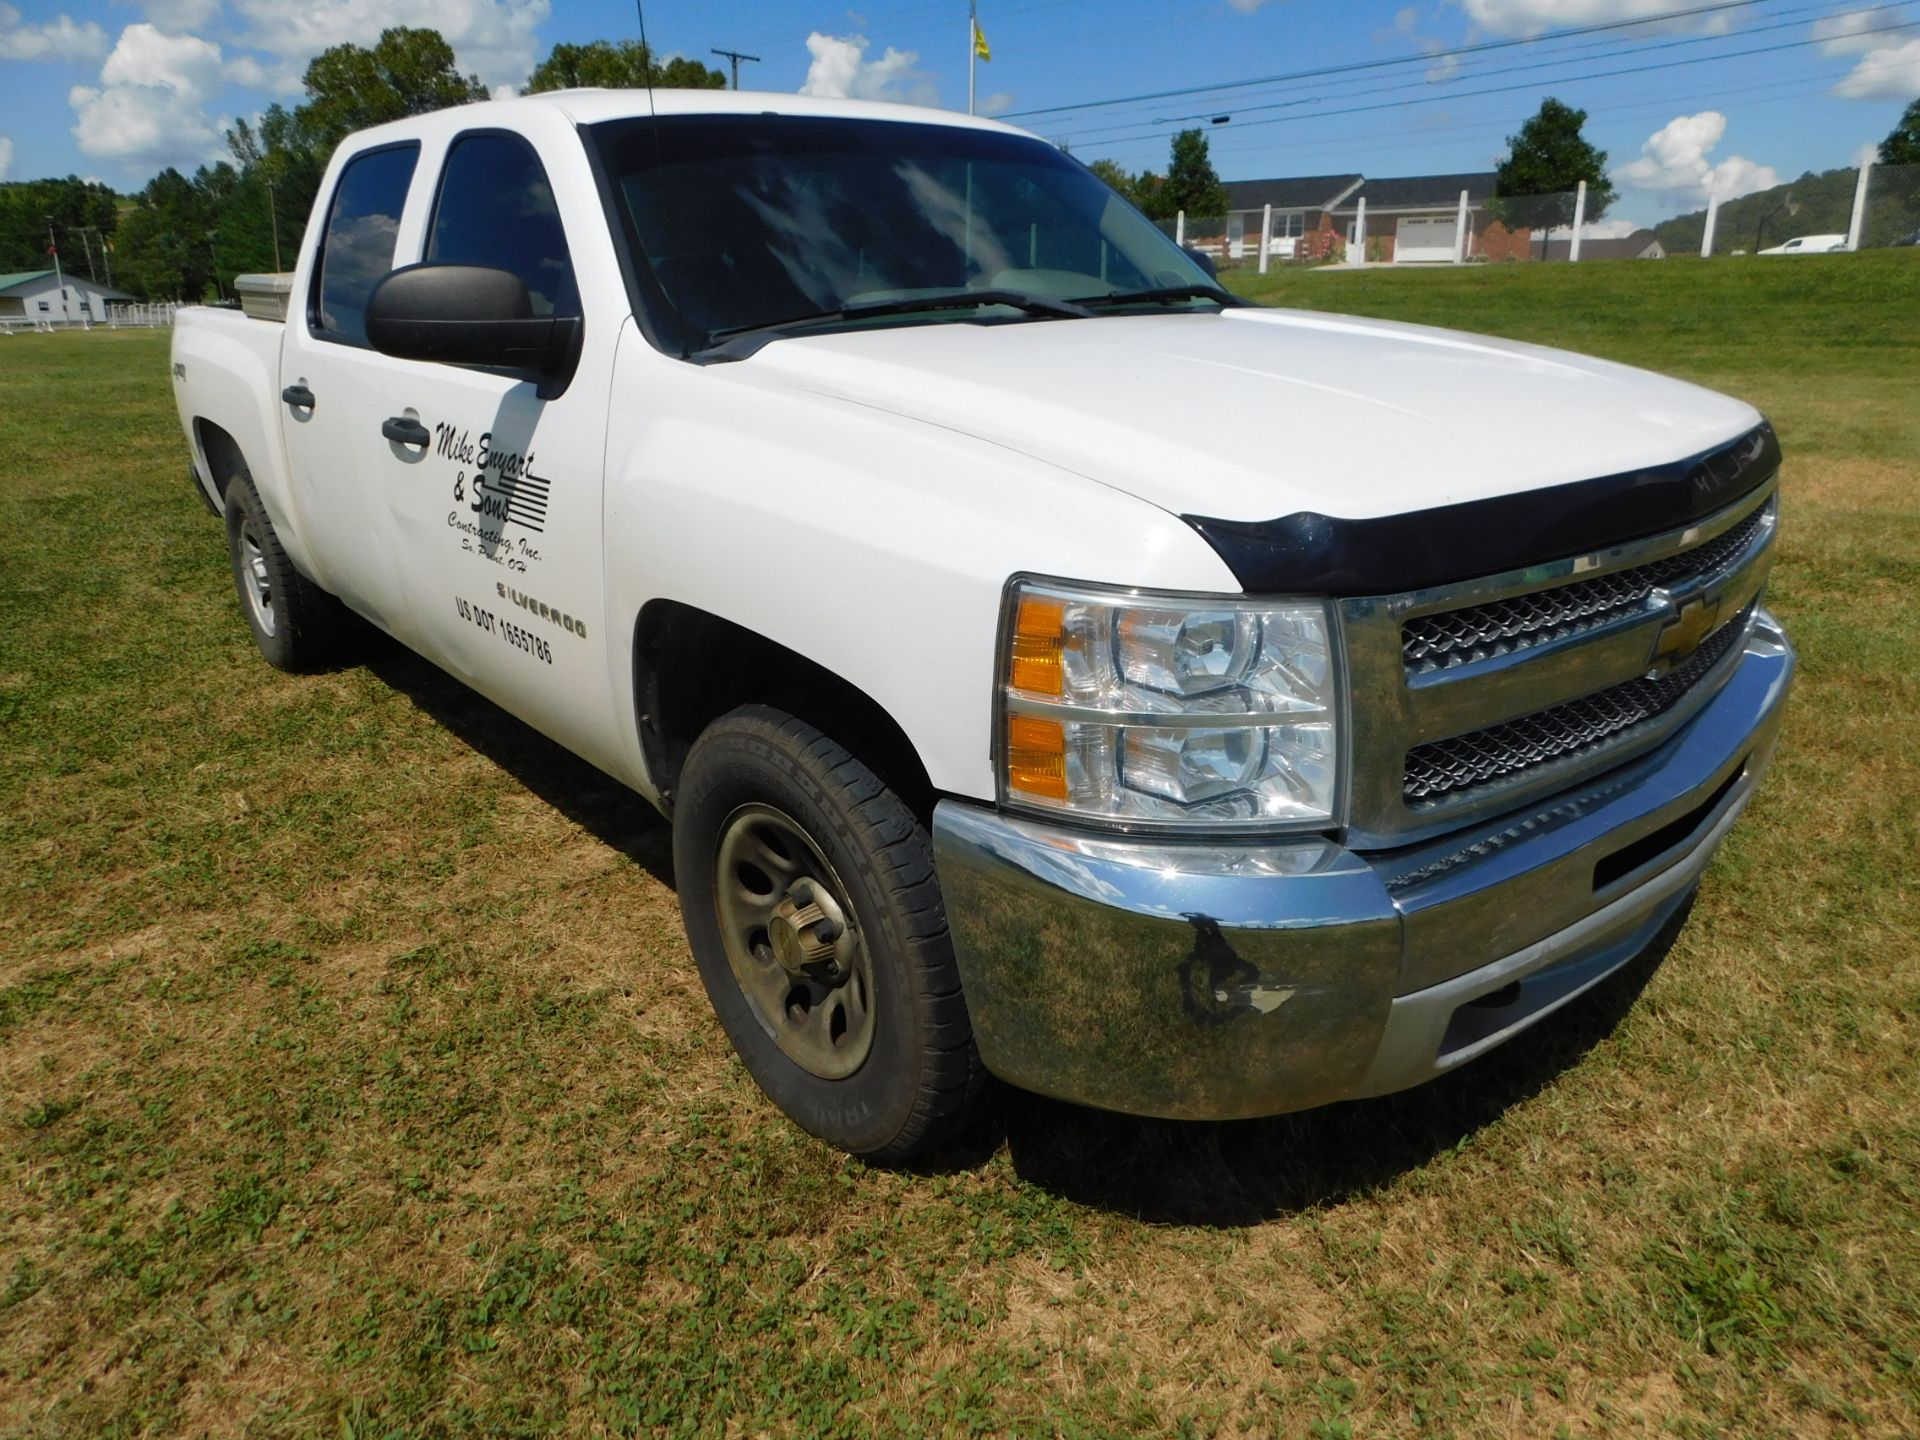 2011 Chevy 2500 Silverado Pickup, Crew Cab, 6' Bed, Automatic, AM/FM, 4WD, AC, PL, Aluminum Tool - Image 3 of 50